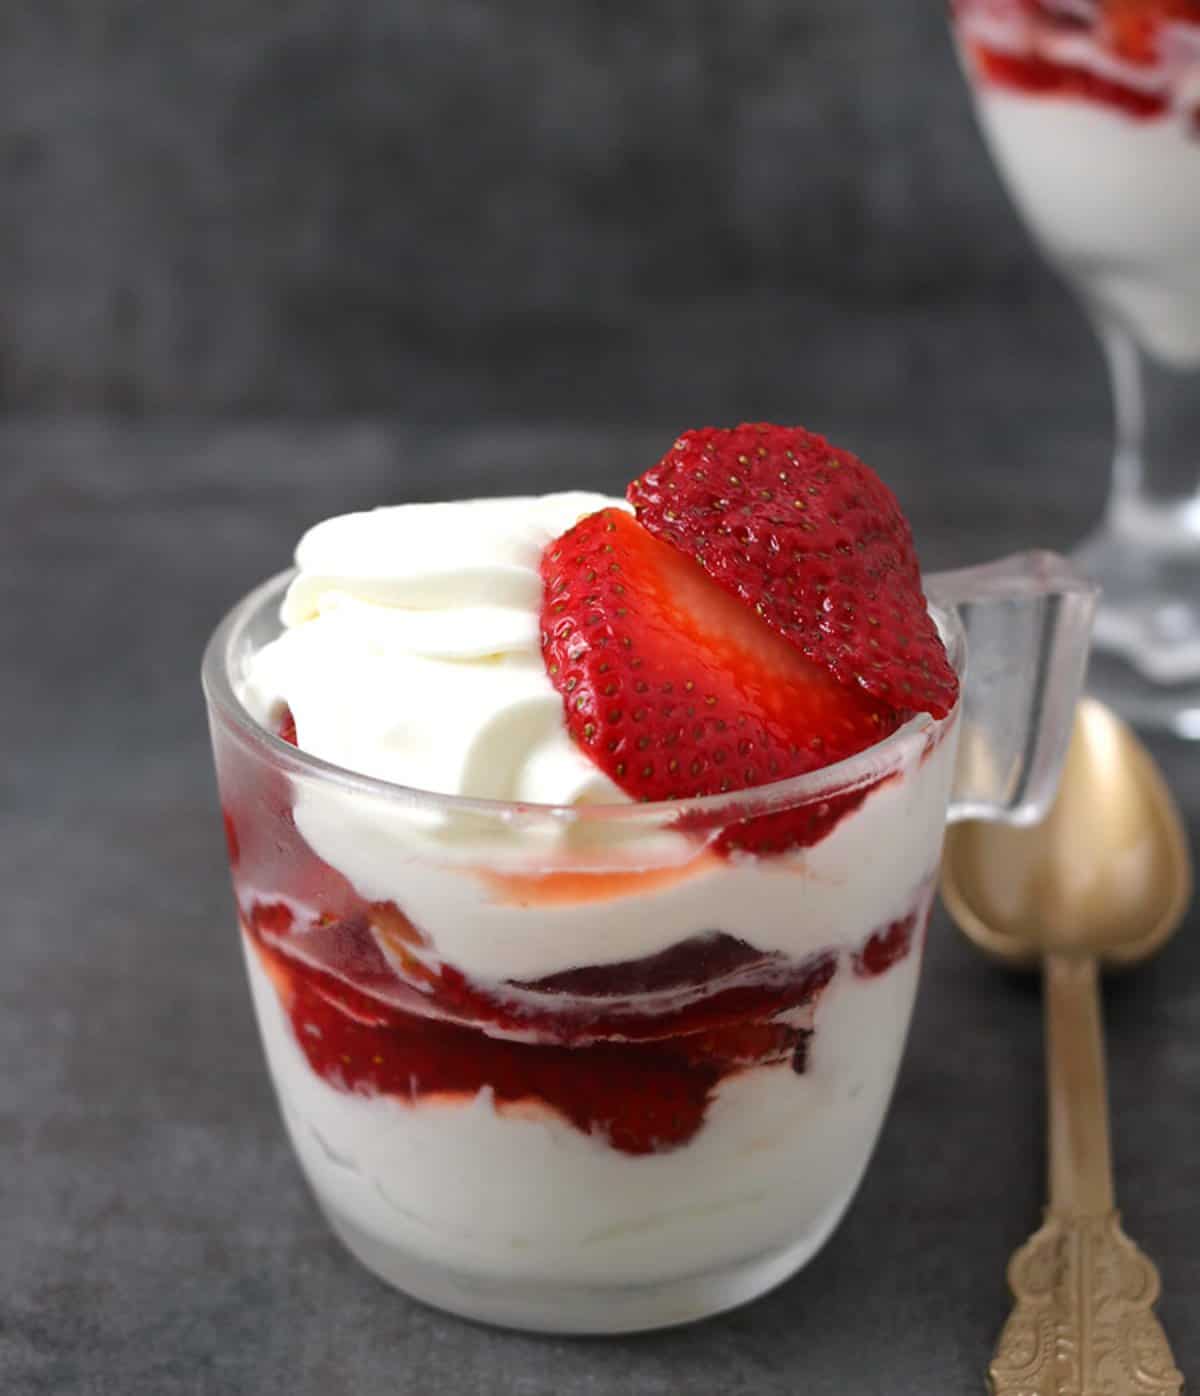 Quick and Easy Strawberry Fool, a popular food item at Wimbledon tournament.